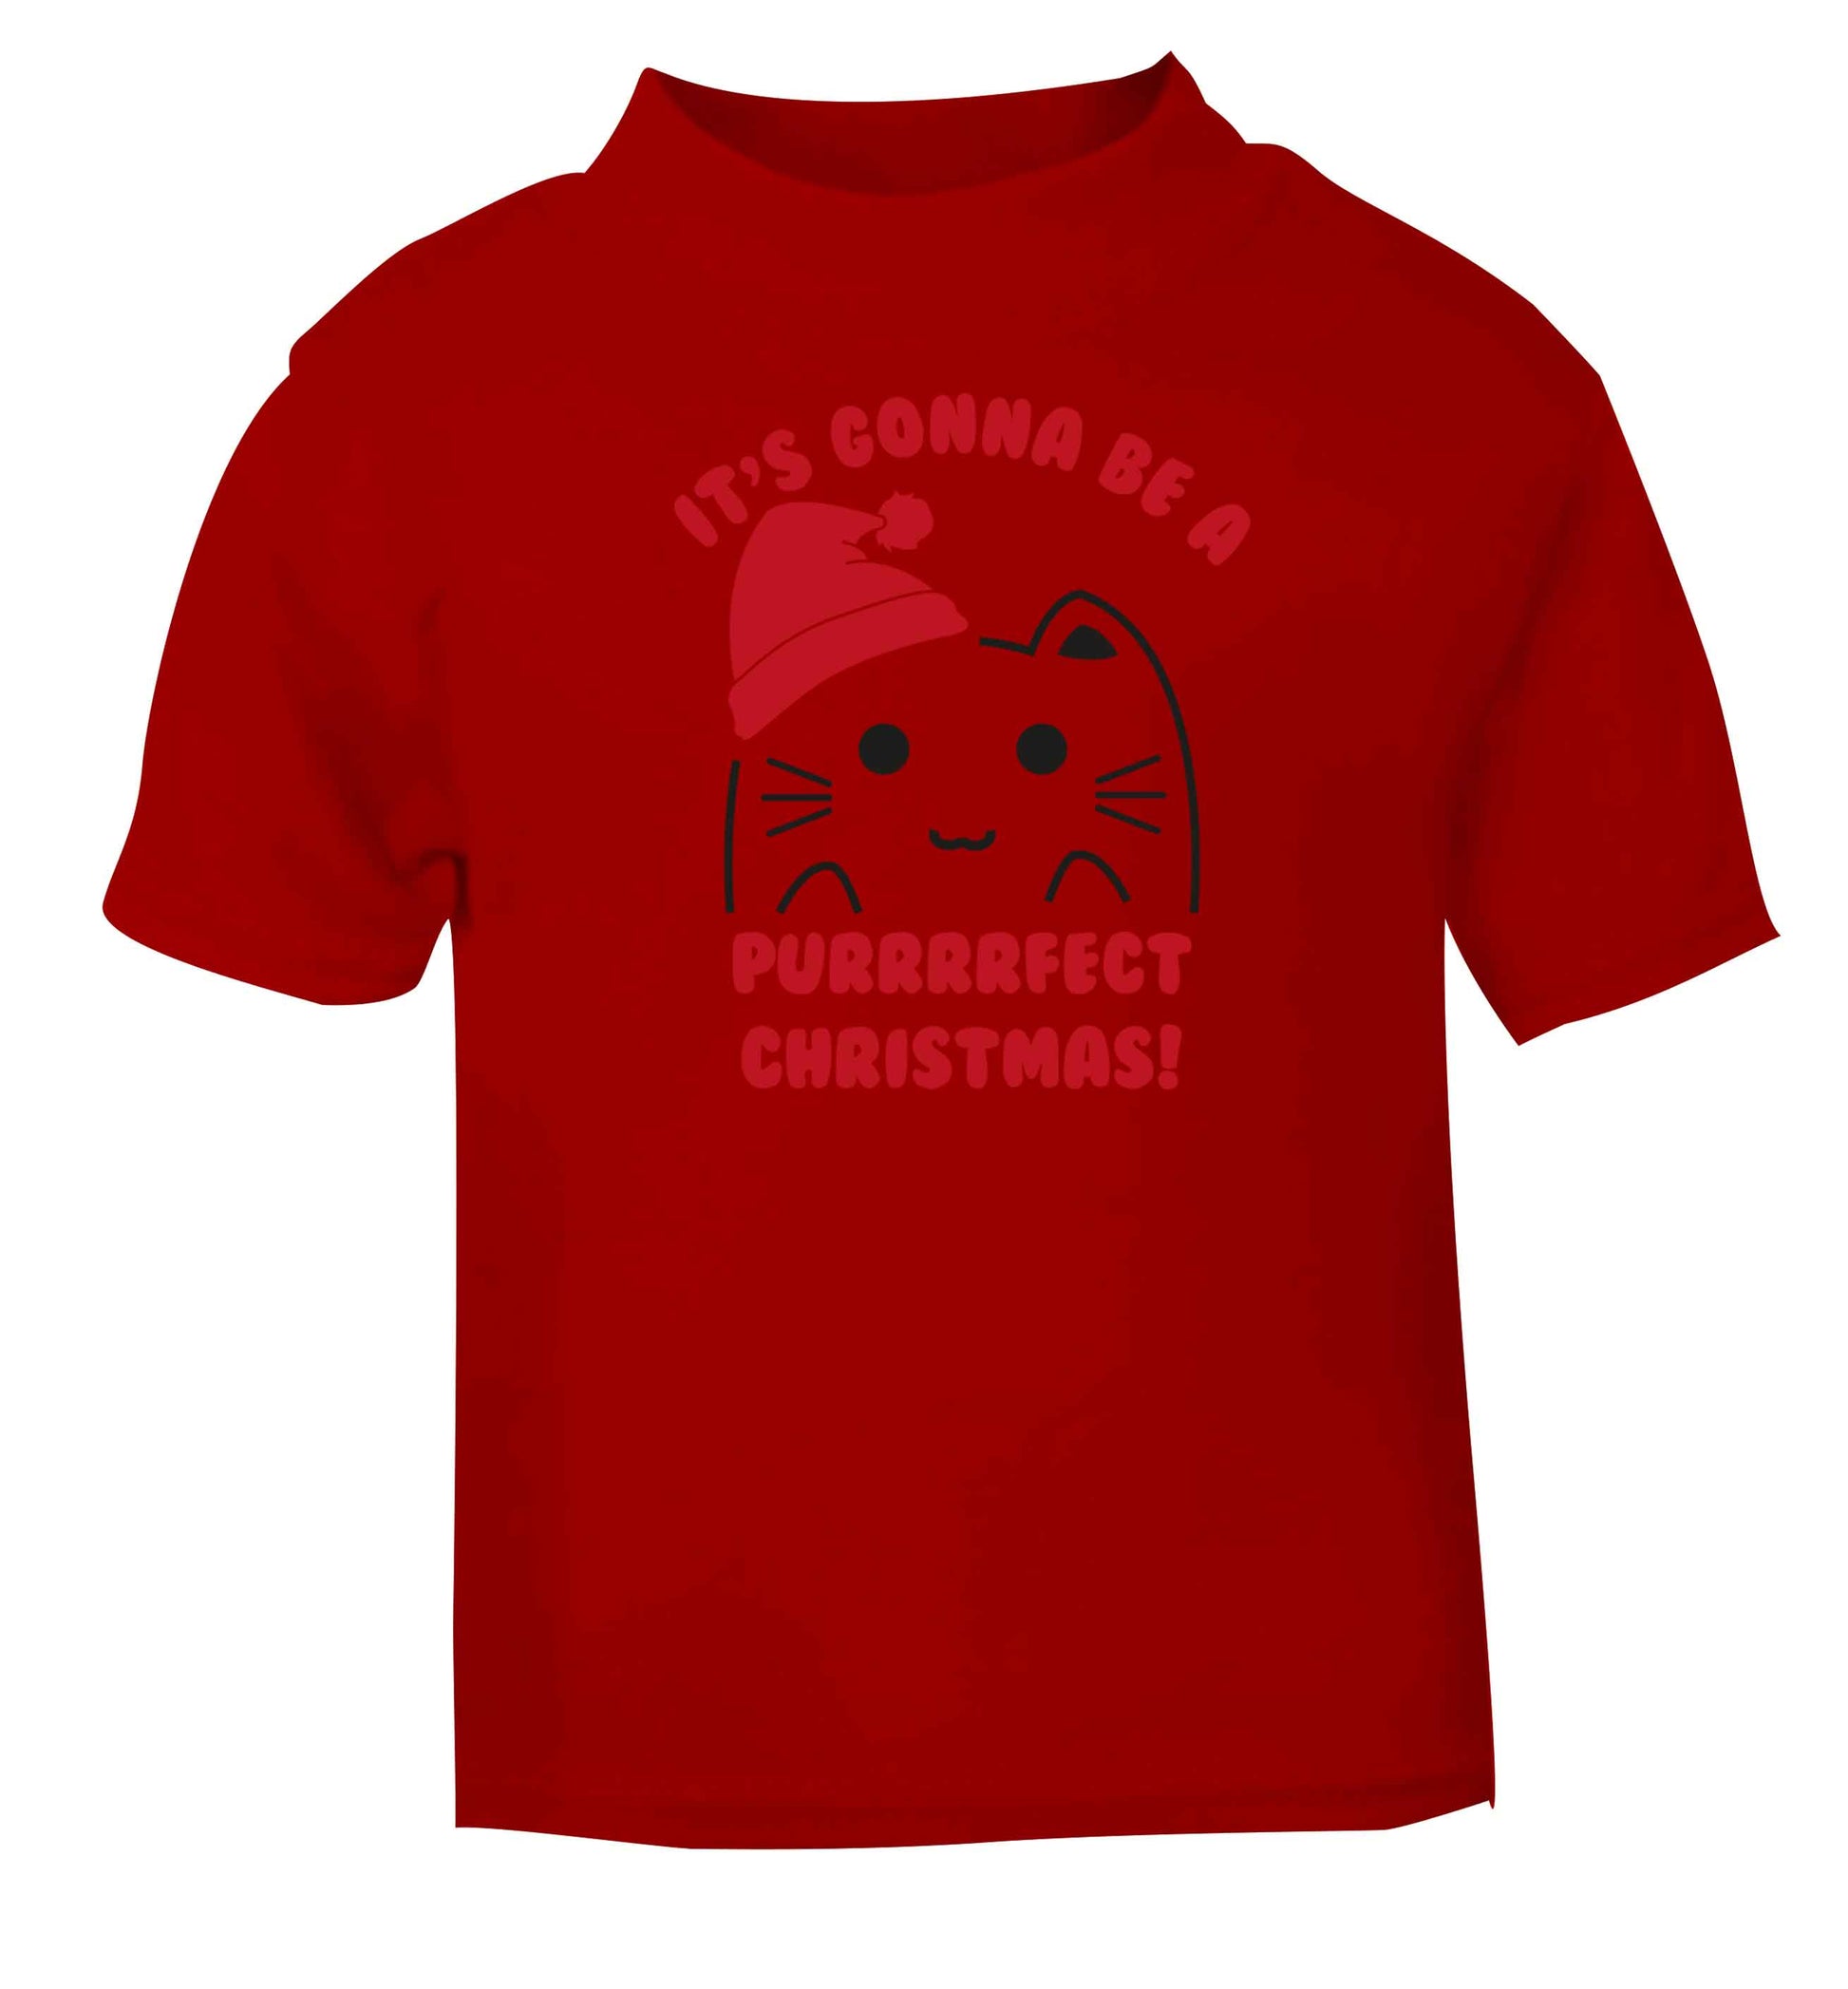 It's going to be a purrfect Christmas red baby toddler Tshirt 2 Years